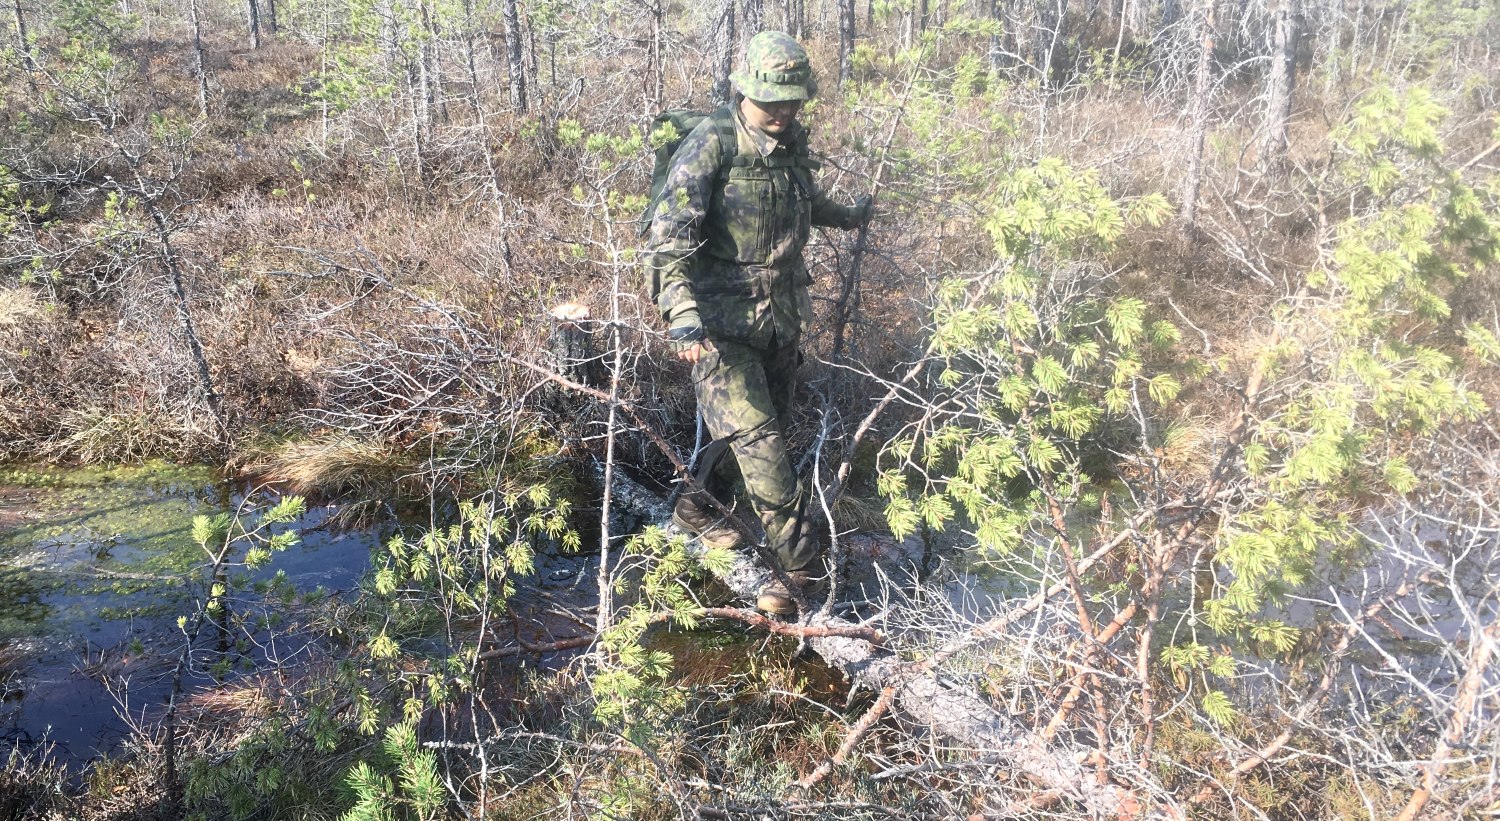 Person in camouflage clothing crossing a stream along a fallen tree.